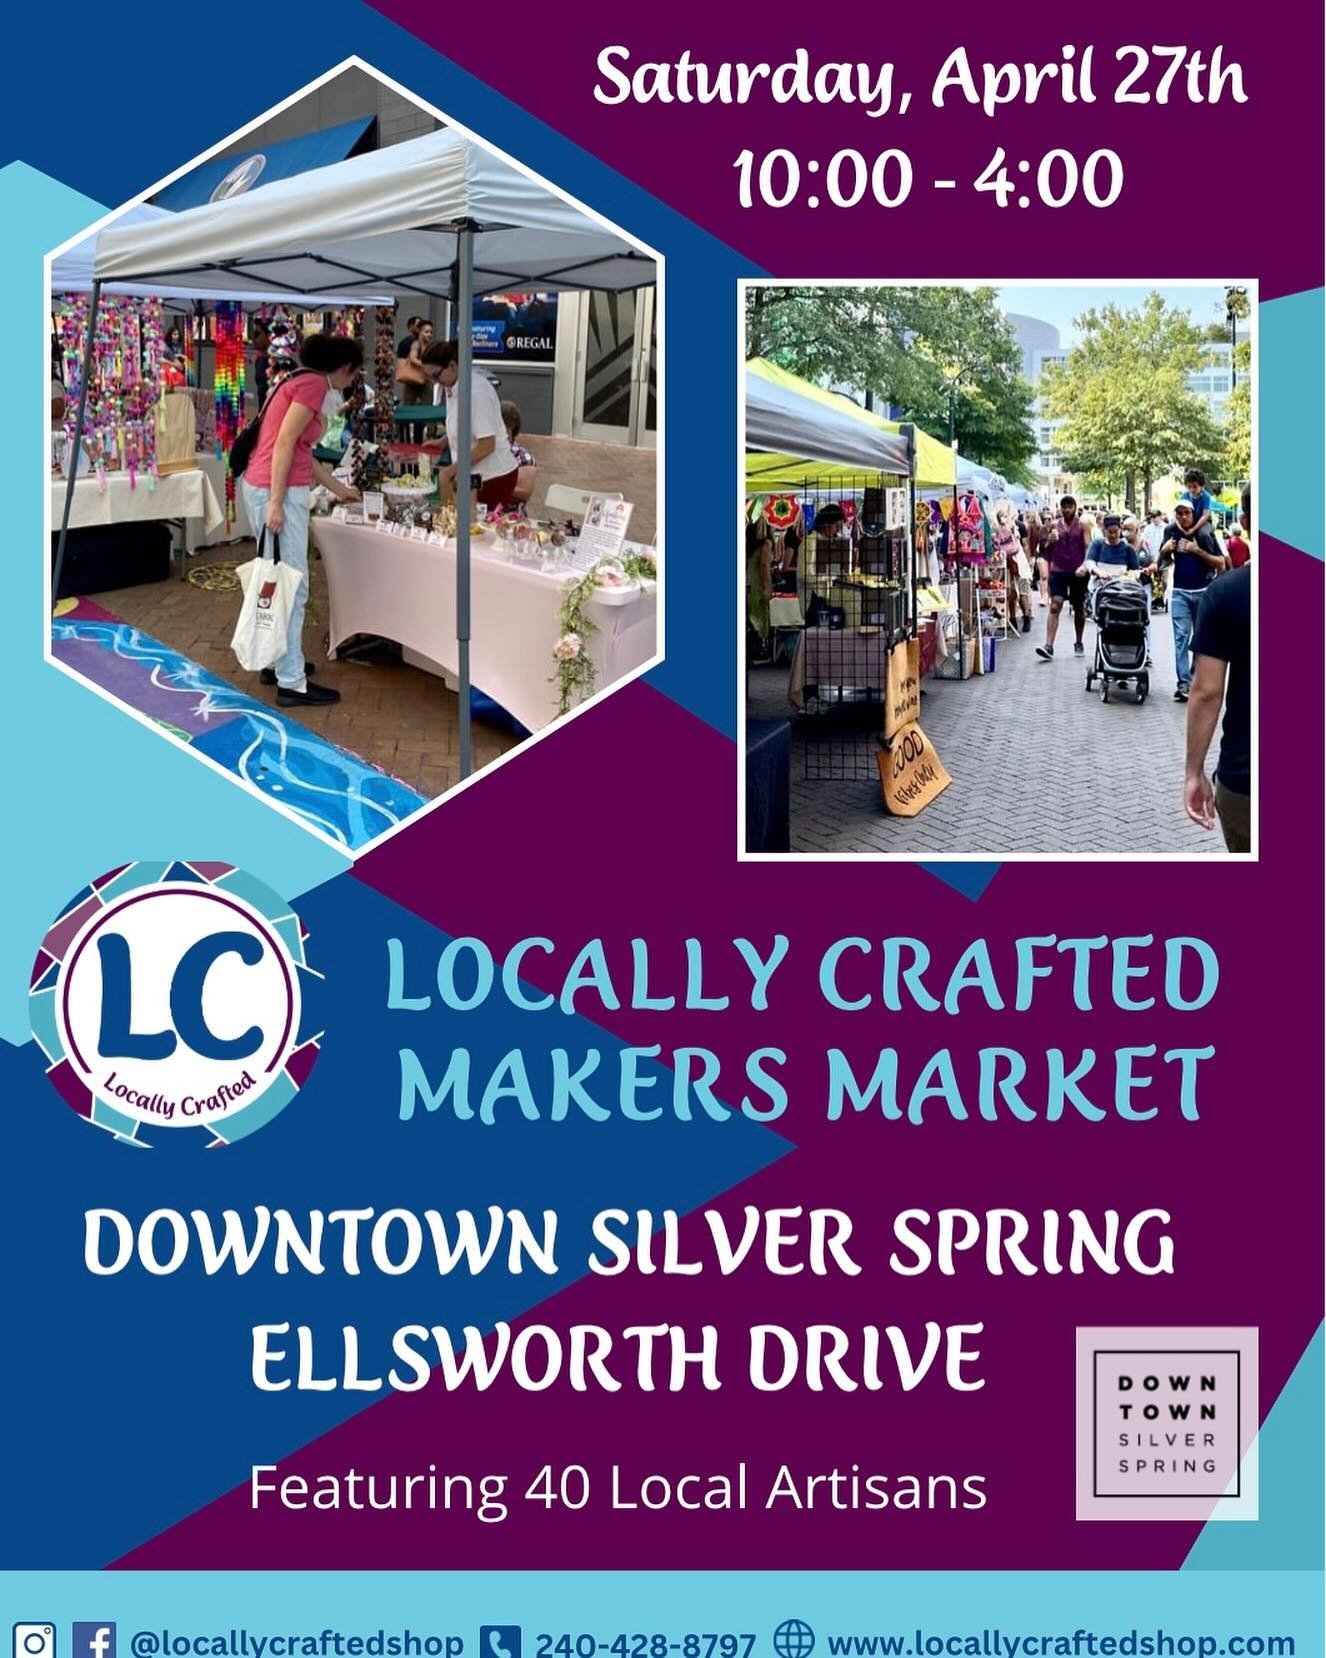 Looking forward to being back in downtown Silver Spring this Saturday.  @locallycraftedshop  is hosting this great craft show. Lots of cool artists!